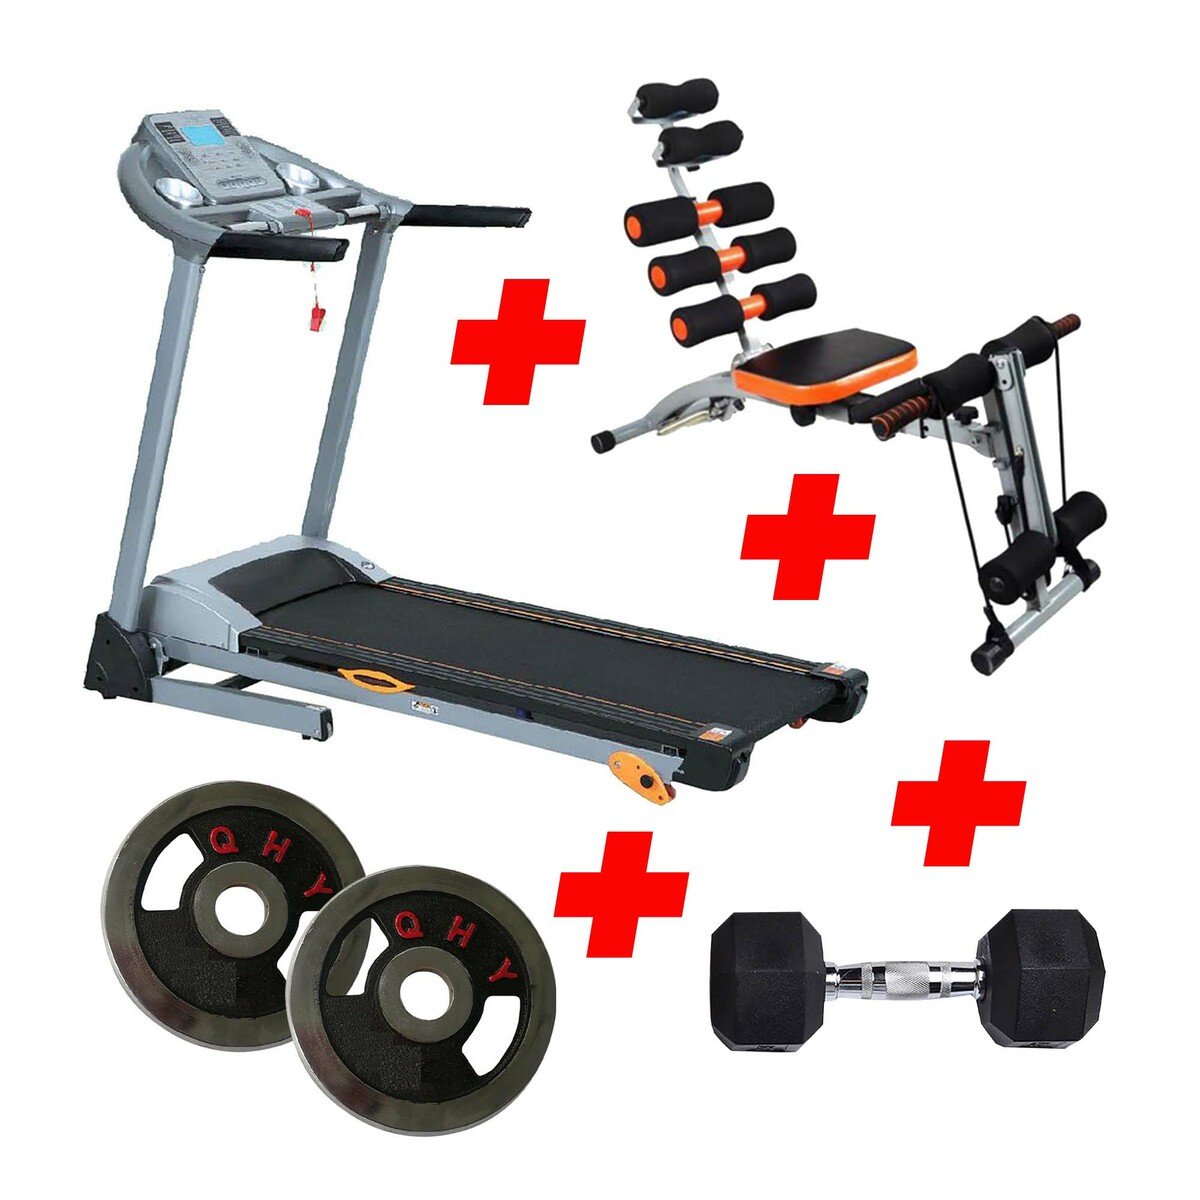 Techno Gear Motorized Treadmill YK-0642C-1 2HP + Six Pack Care RD28 + Dumbbell 8Kg 1Piece + Chrome Weight 2Piece Plate 10Kg